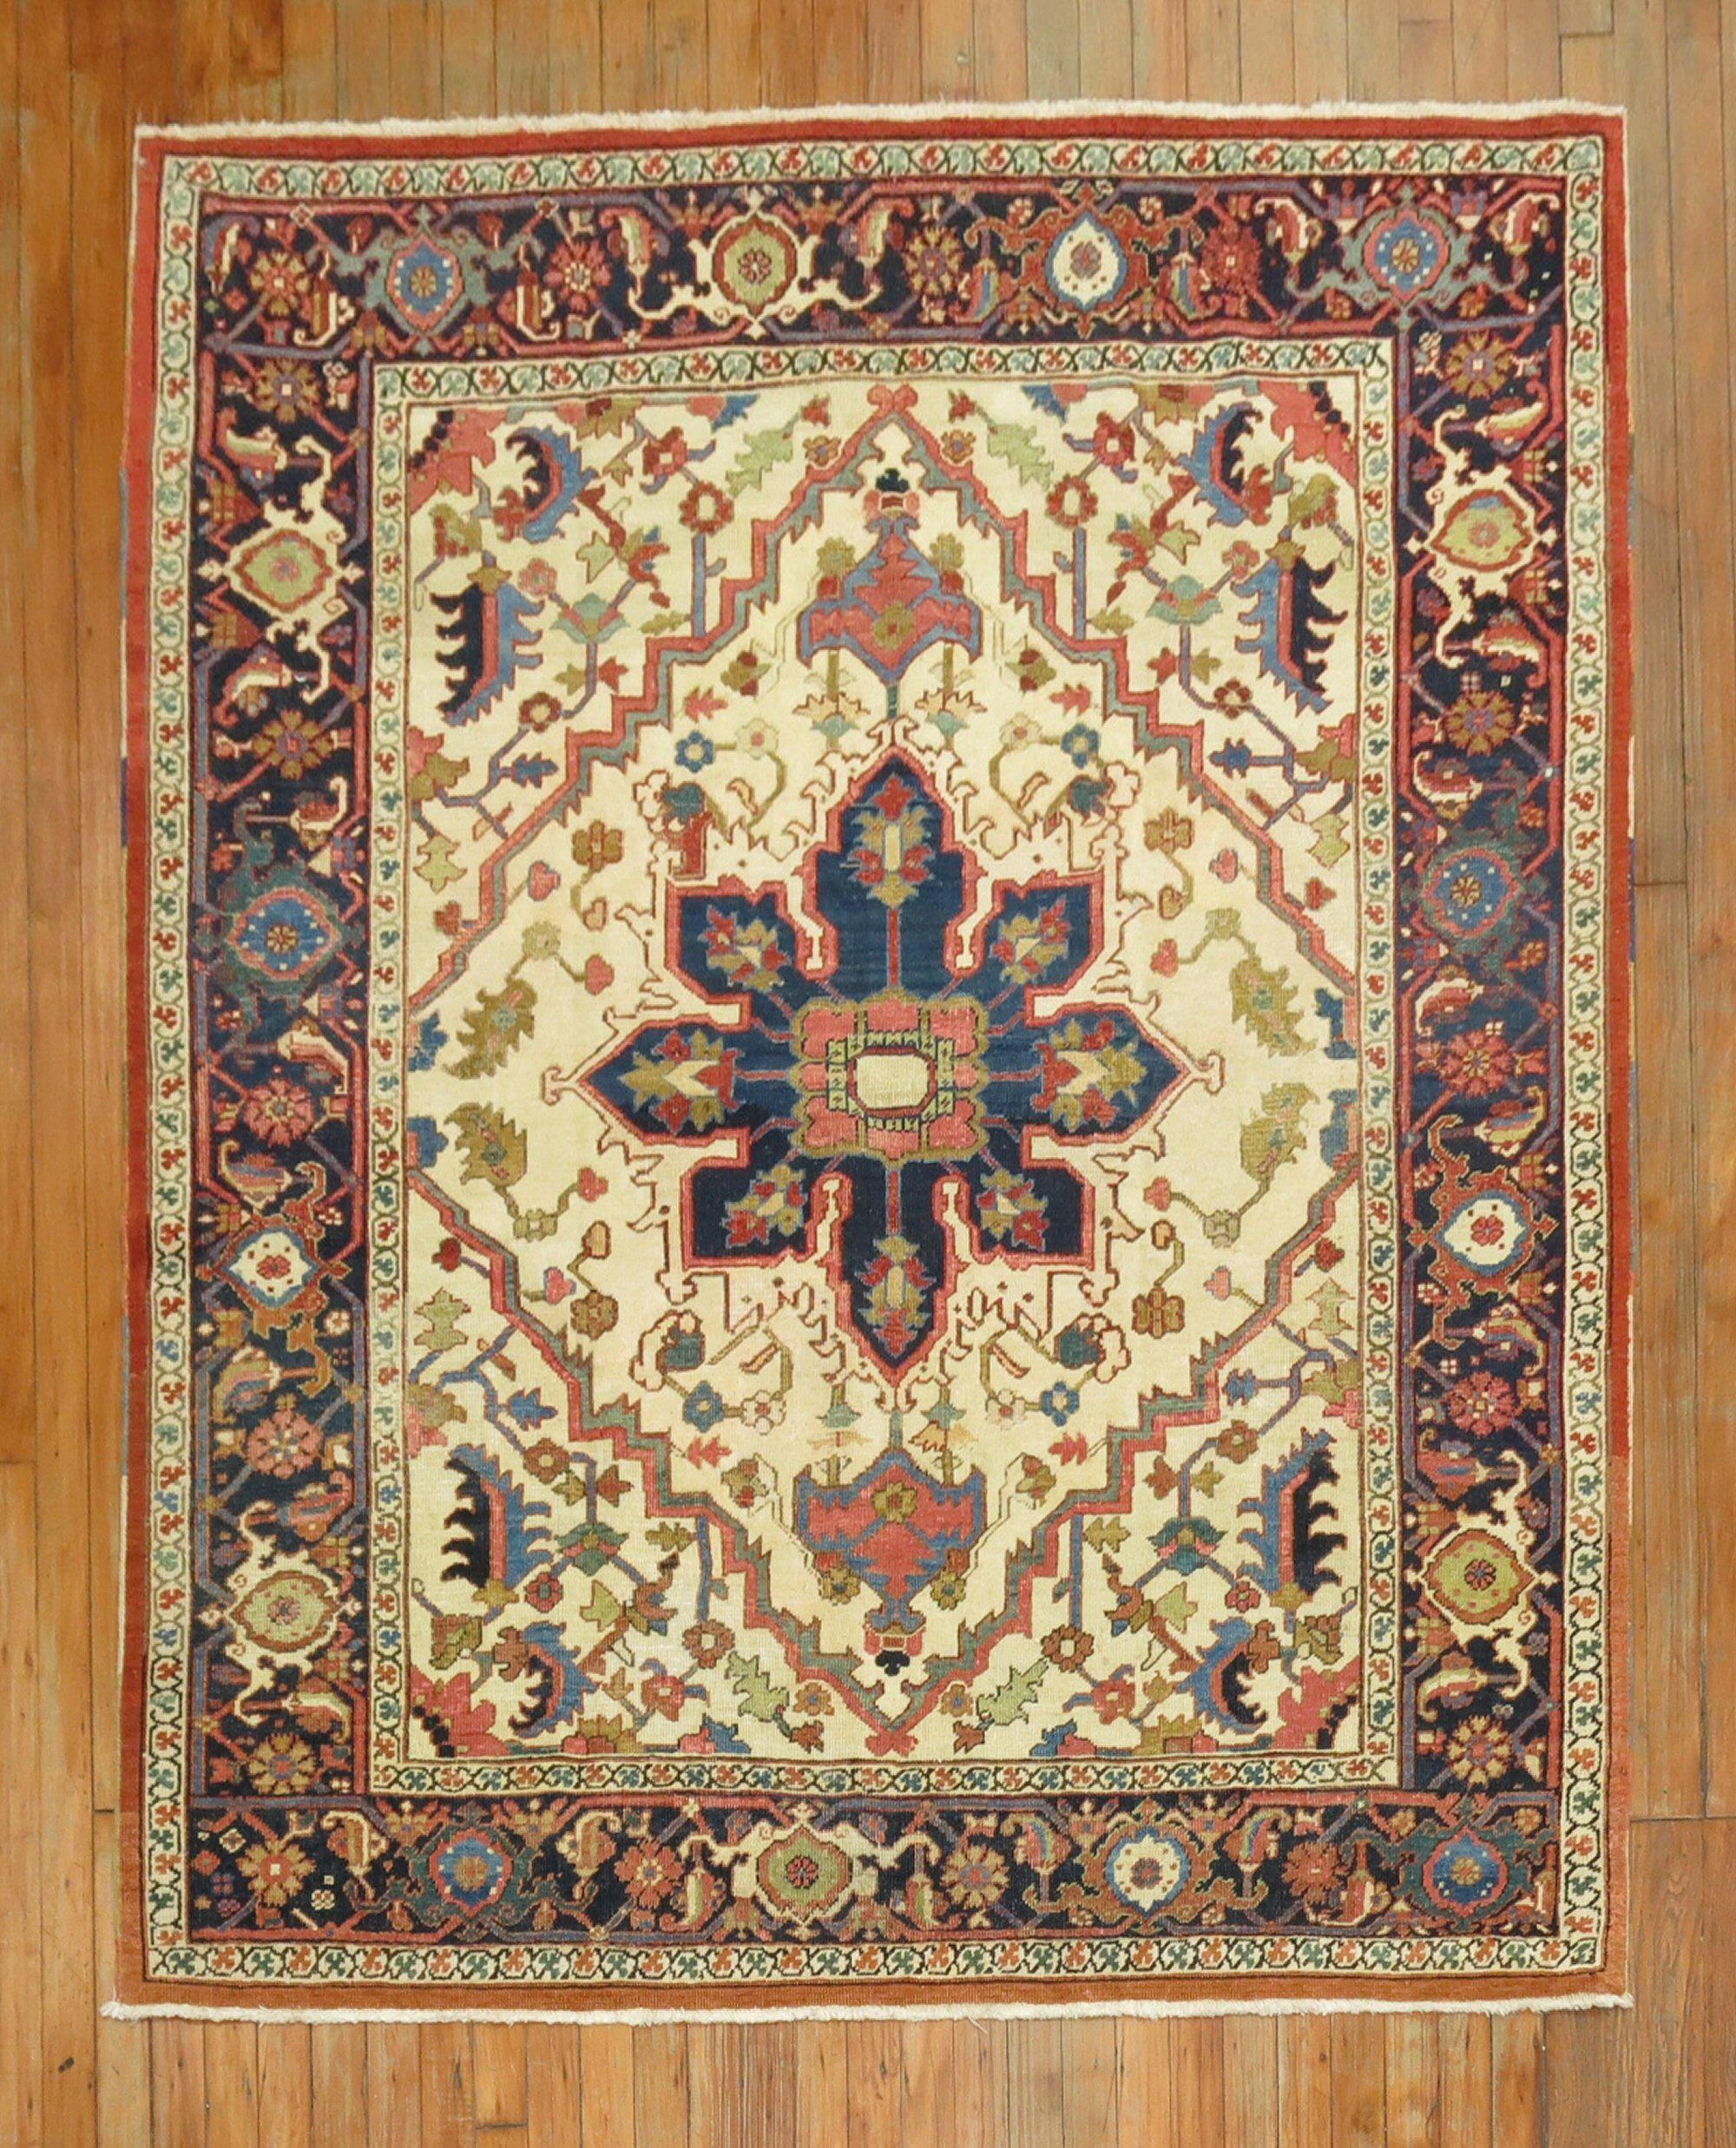 A Square Persian Heriz rug from the 2nd quarter of the 20th century.

Measures: 5'4'' x 5'11''.